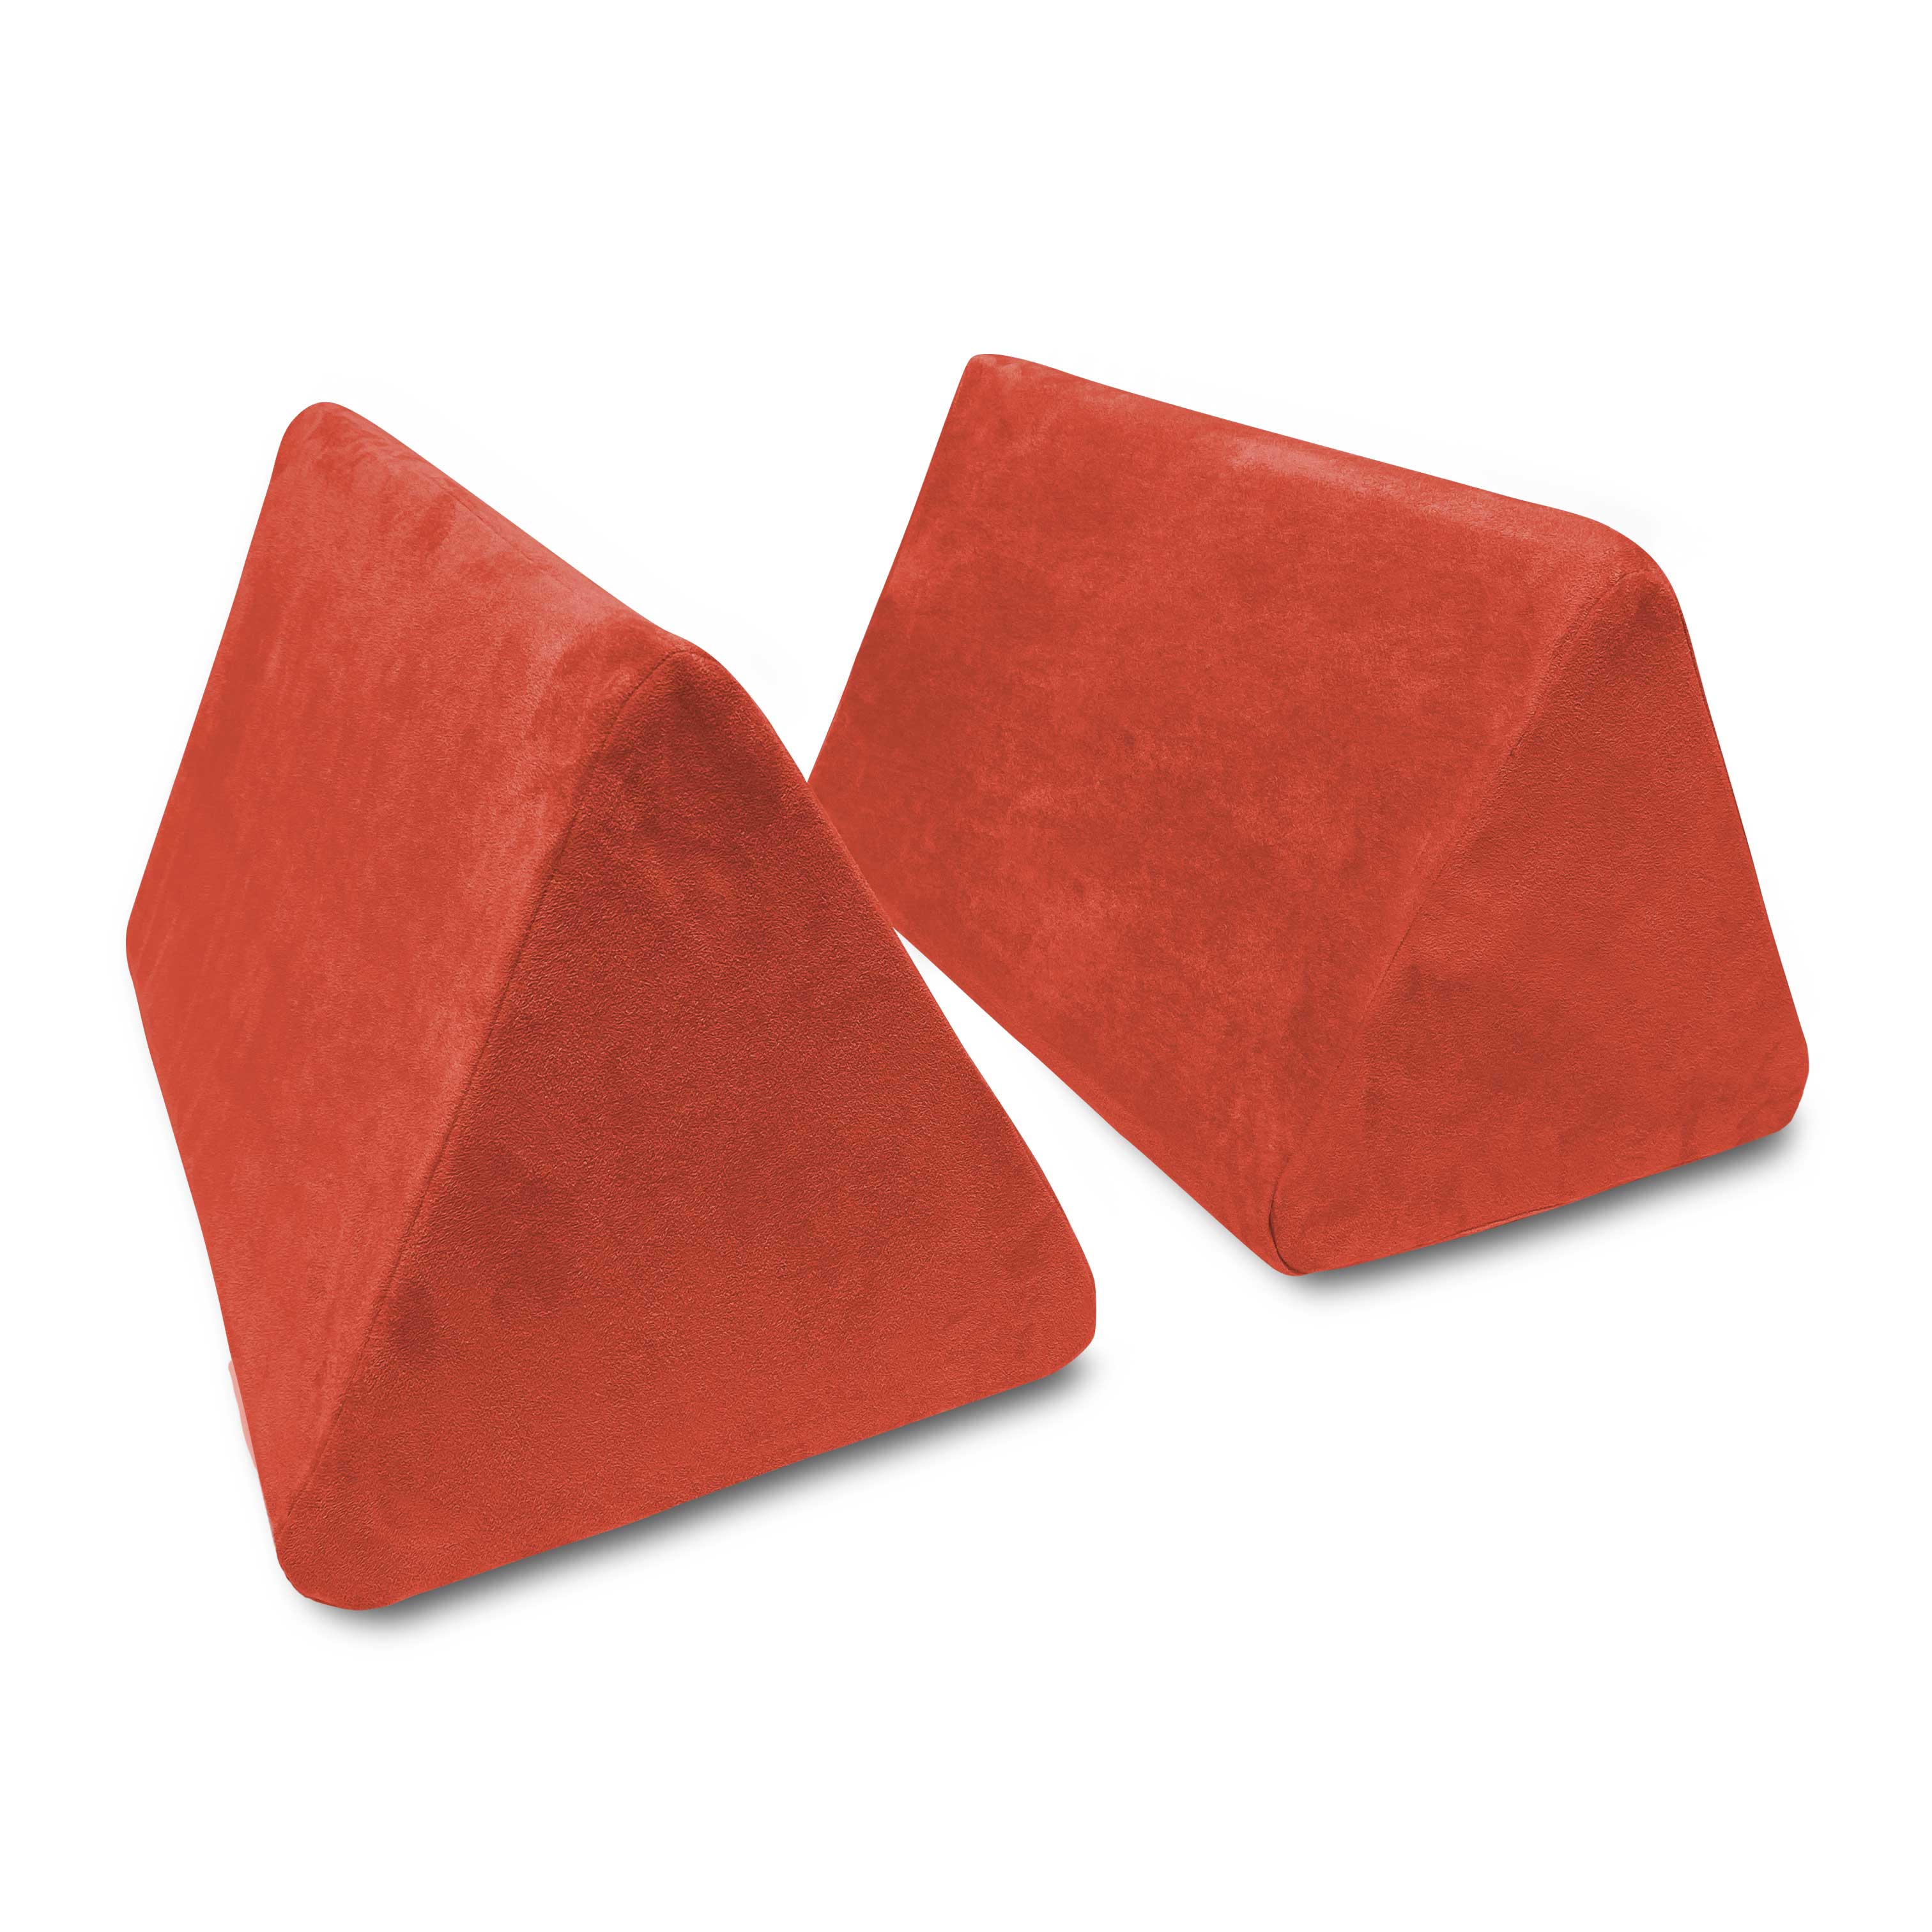 Two soft microsuede burnt red triangle foam wedge pillows on white background.